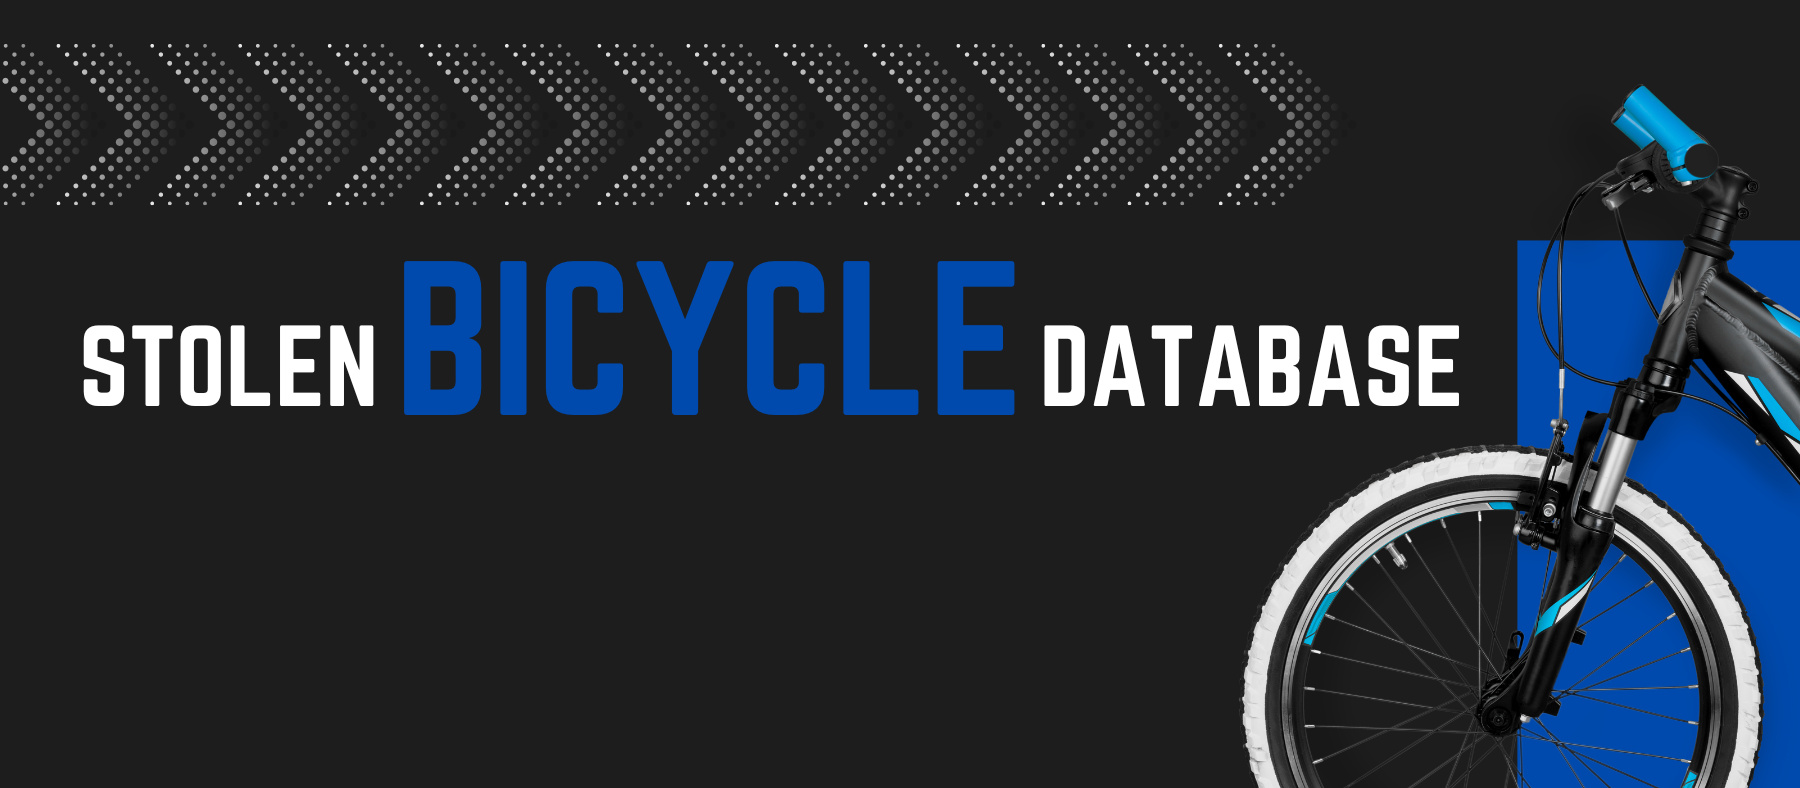 Graphic to highlight HPD's Stolen Bicycle Database